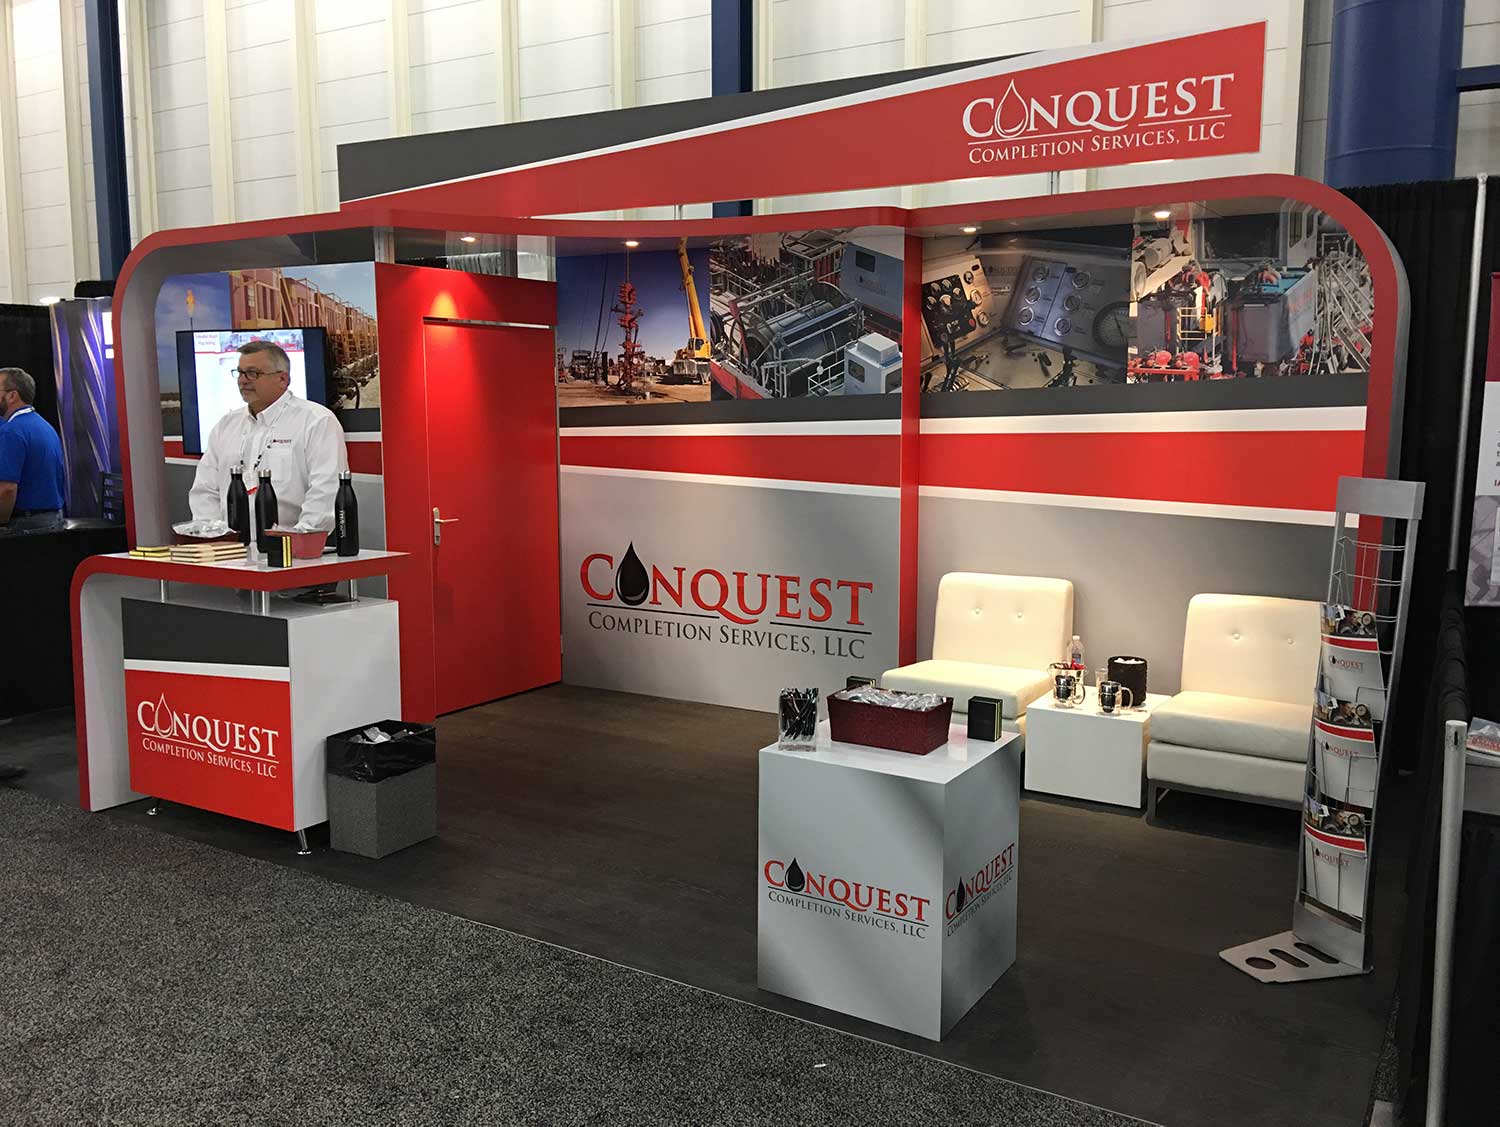 Trade Show Marketing Conquest Completion Services